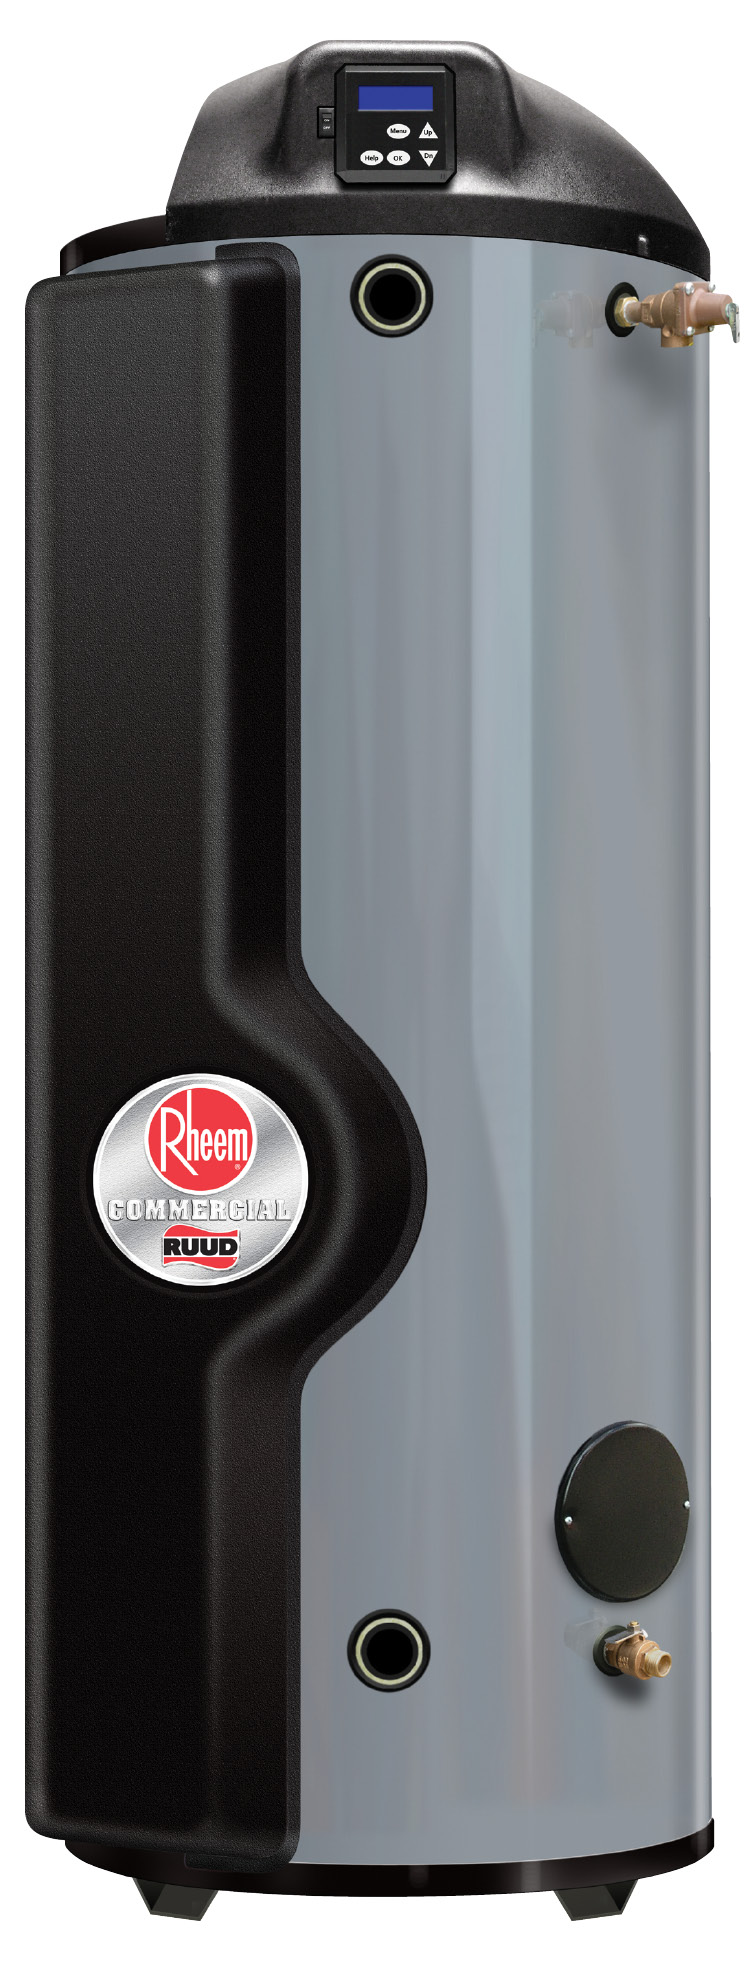 Get Your Spiderfire Commercial Rheem Water Heater at HD Supply Plumbing